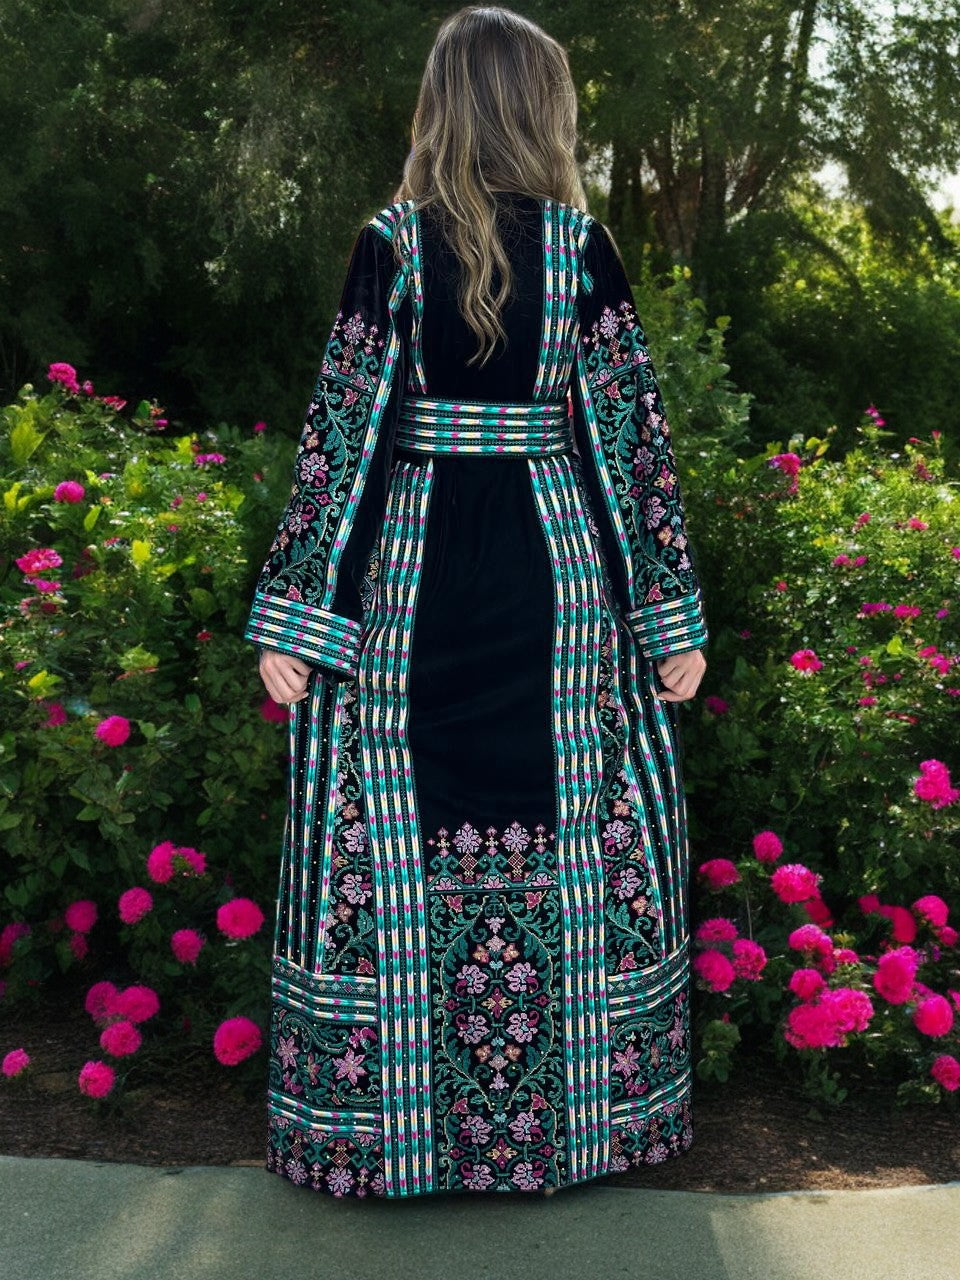 Velvet Beauty - Very High Quality Embroidered Palestinian style Thobe